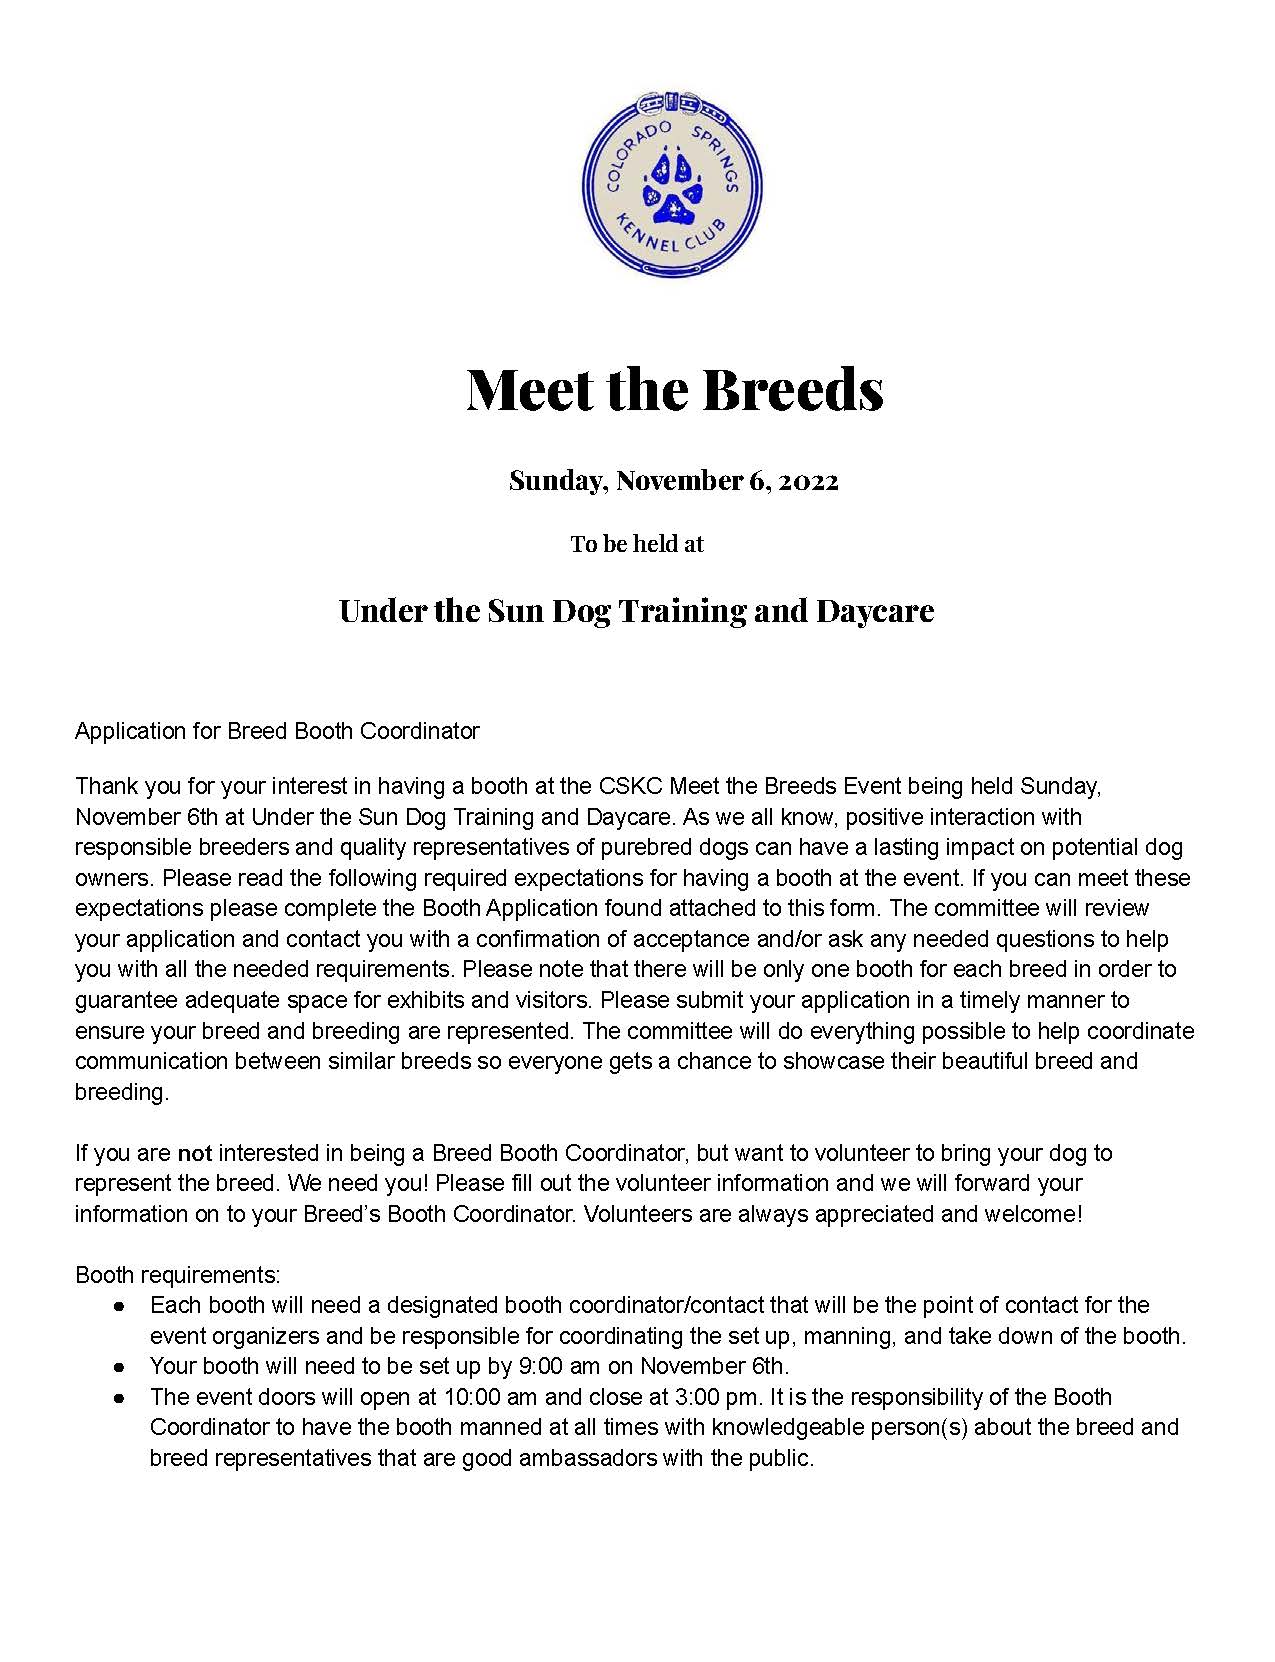 Meet the Breeds Application_Page_1